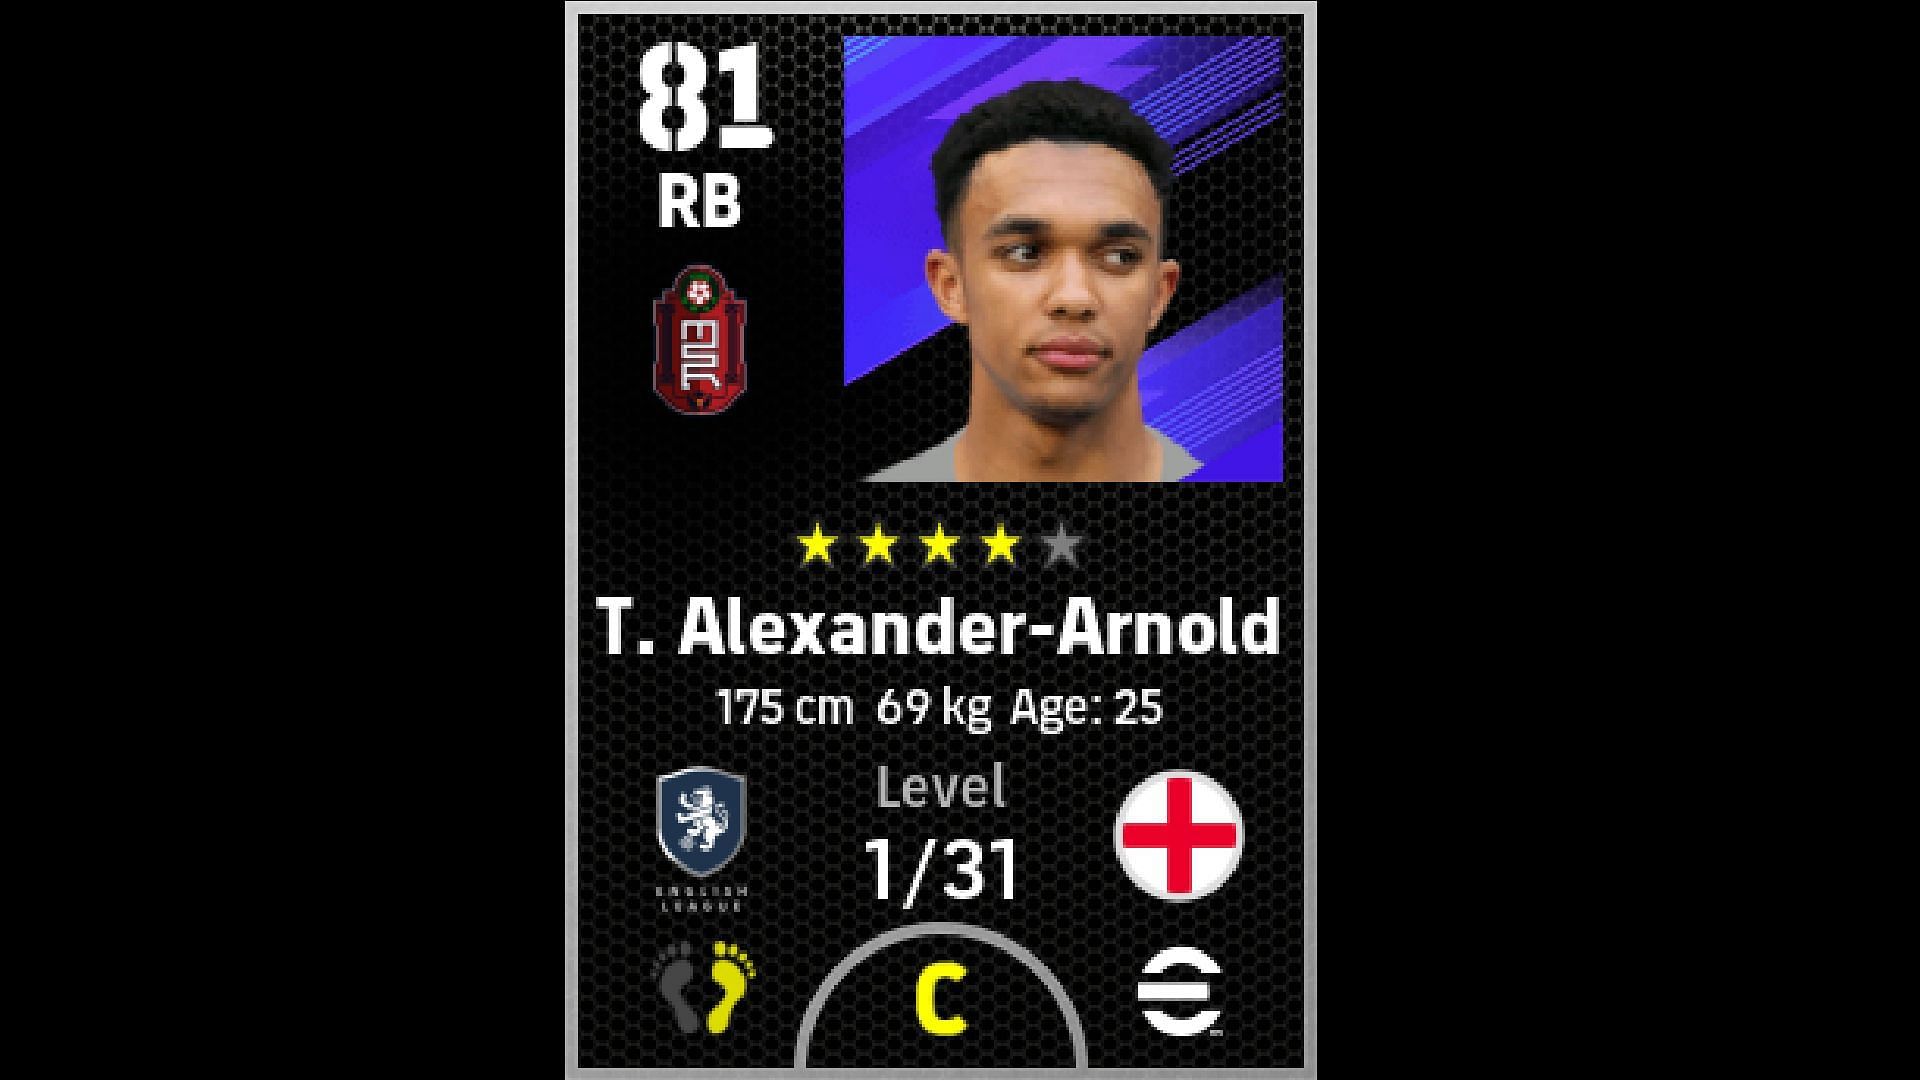 Trent Alexander-Arnold is currently among the best Right Backs in the world (Image via Konami)